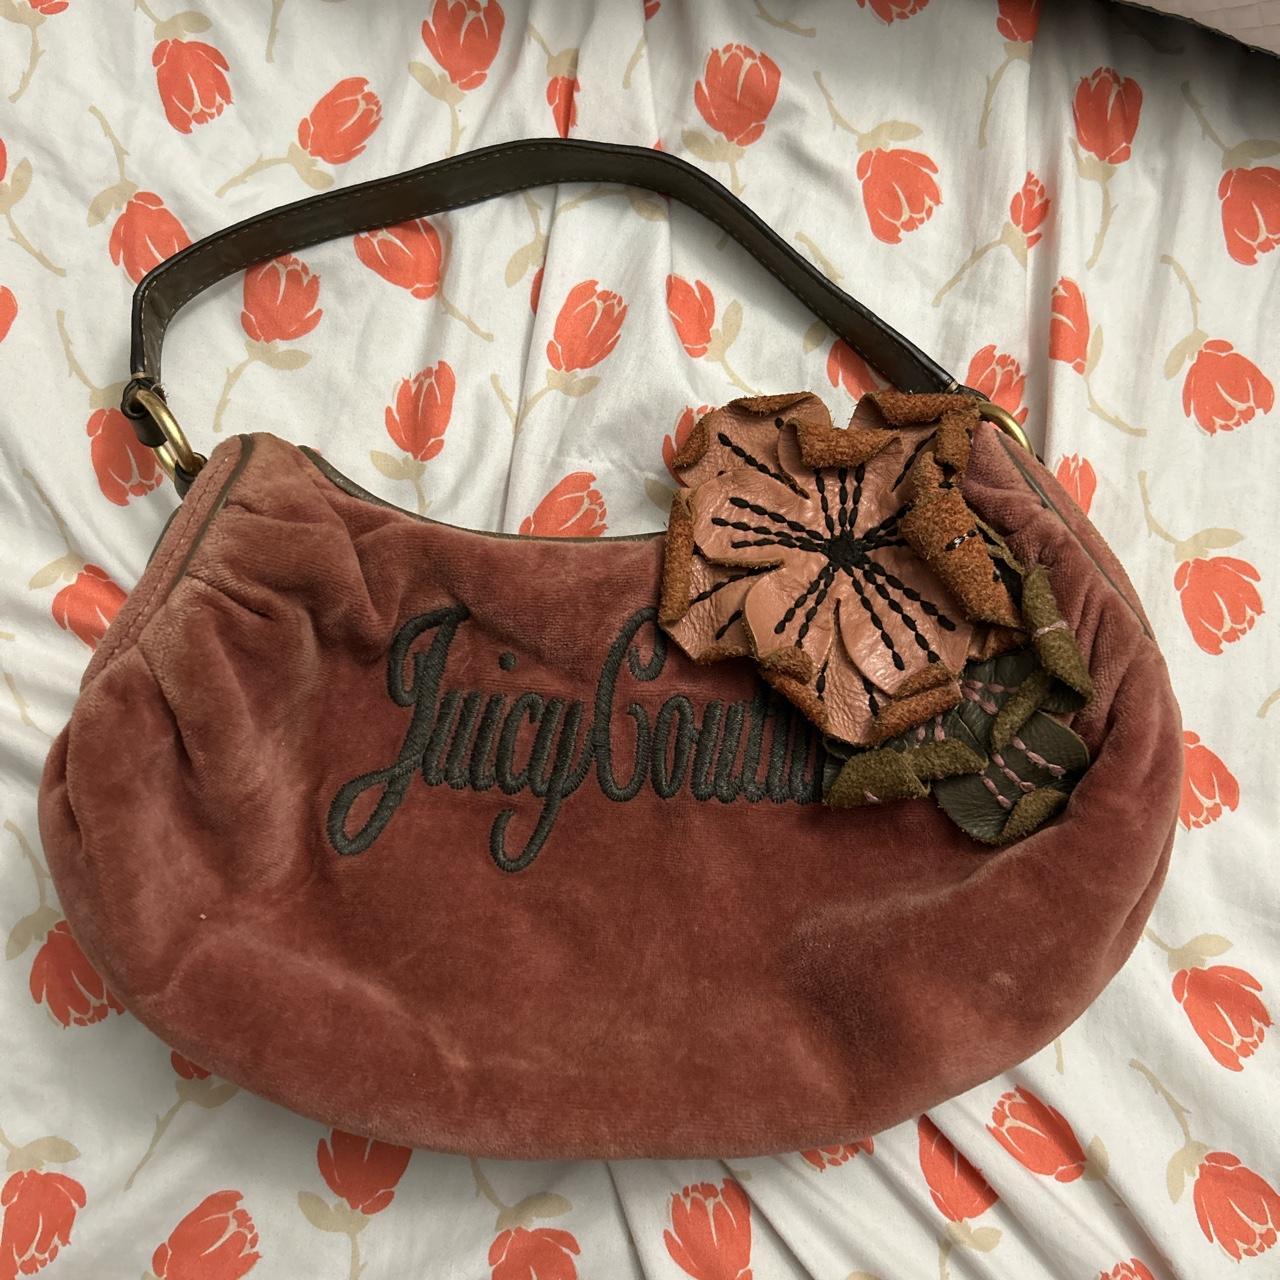 these are my vintage bags from Juicy Couture, both I bought second hand.  The green bag for €40 and the pink one for €50. I would like to know what  kind these